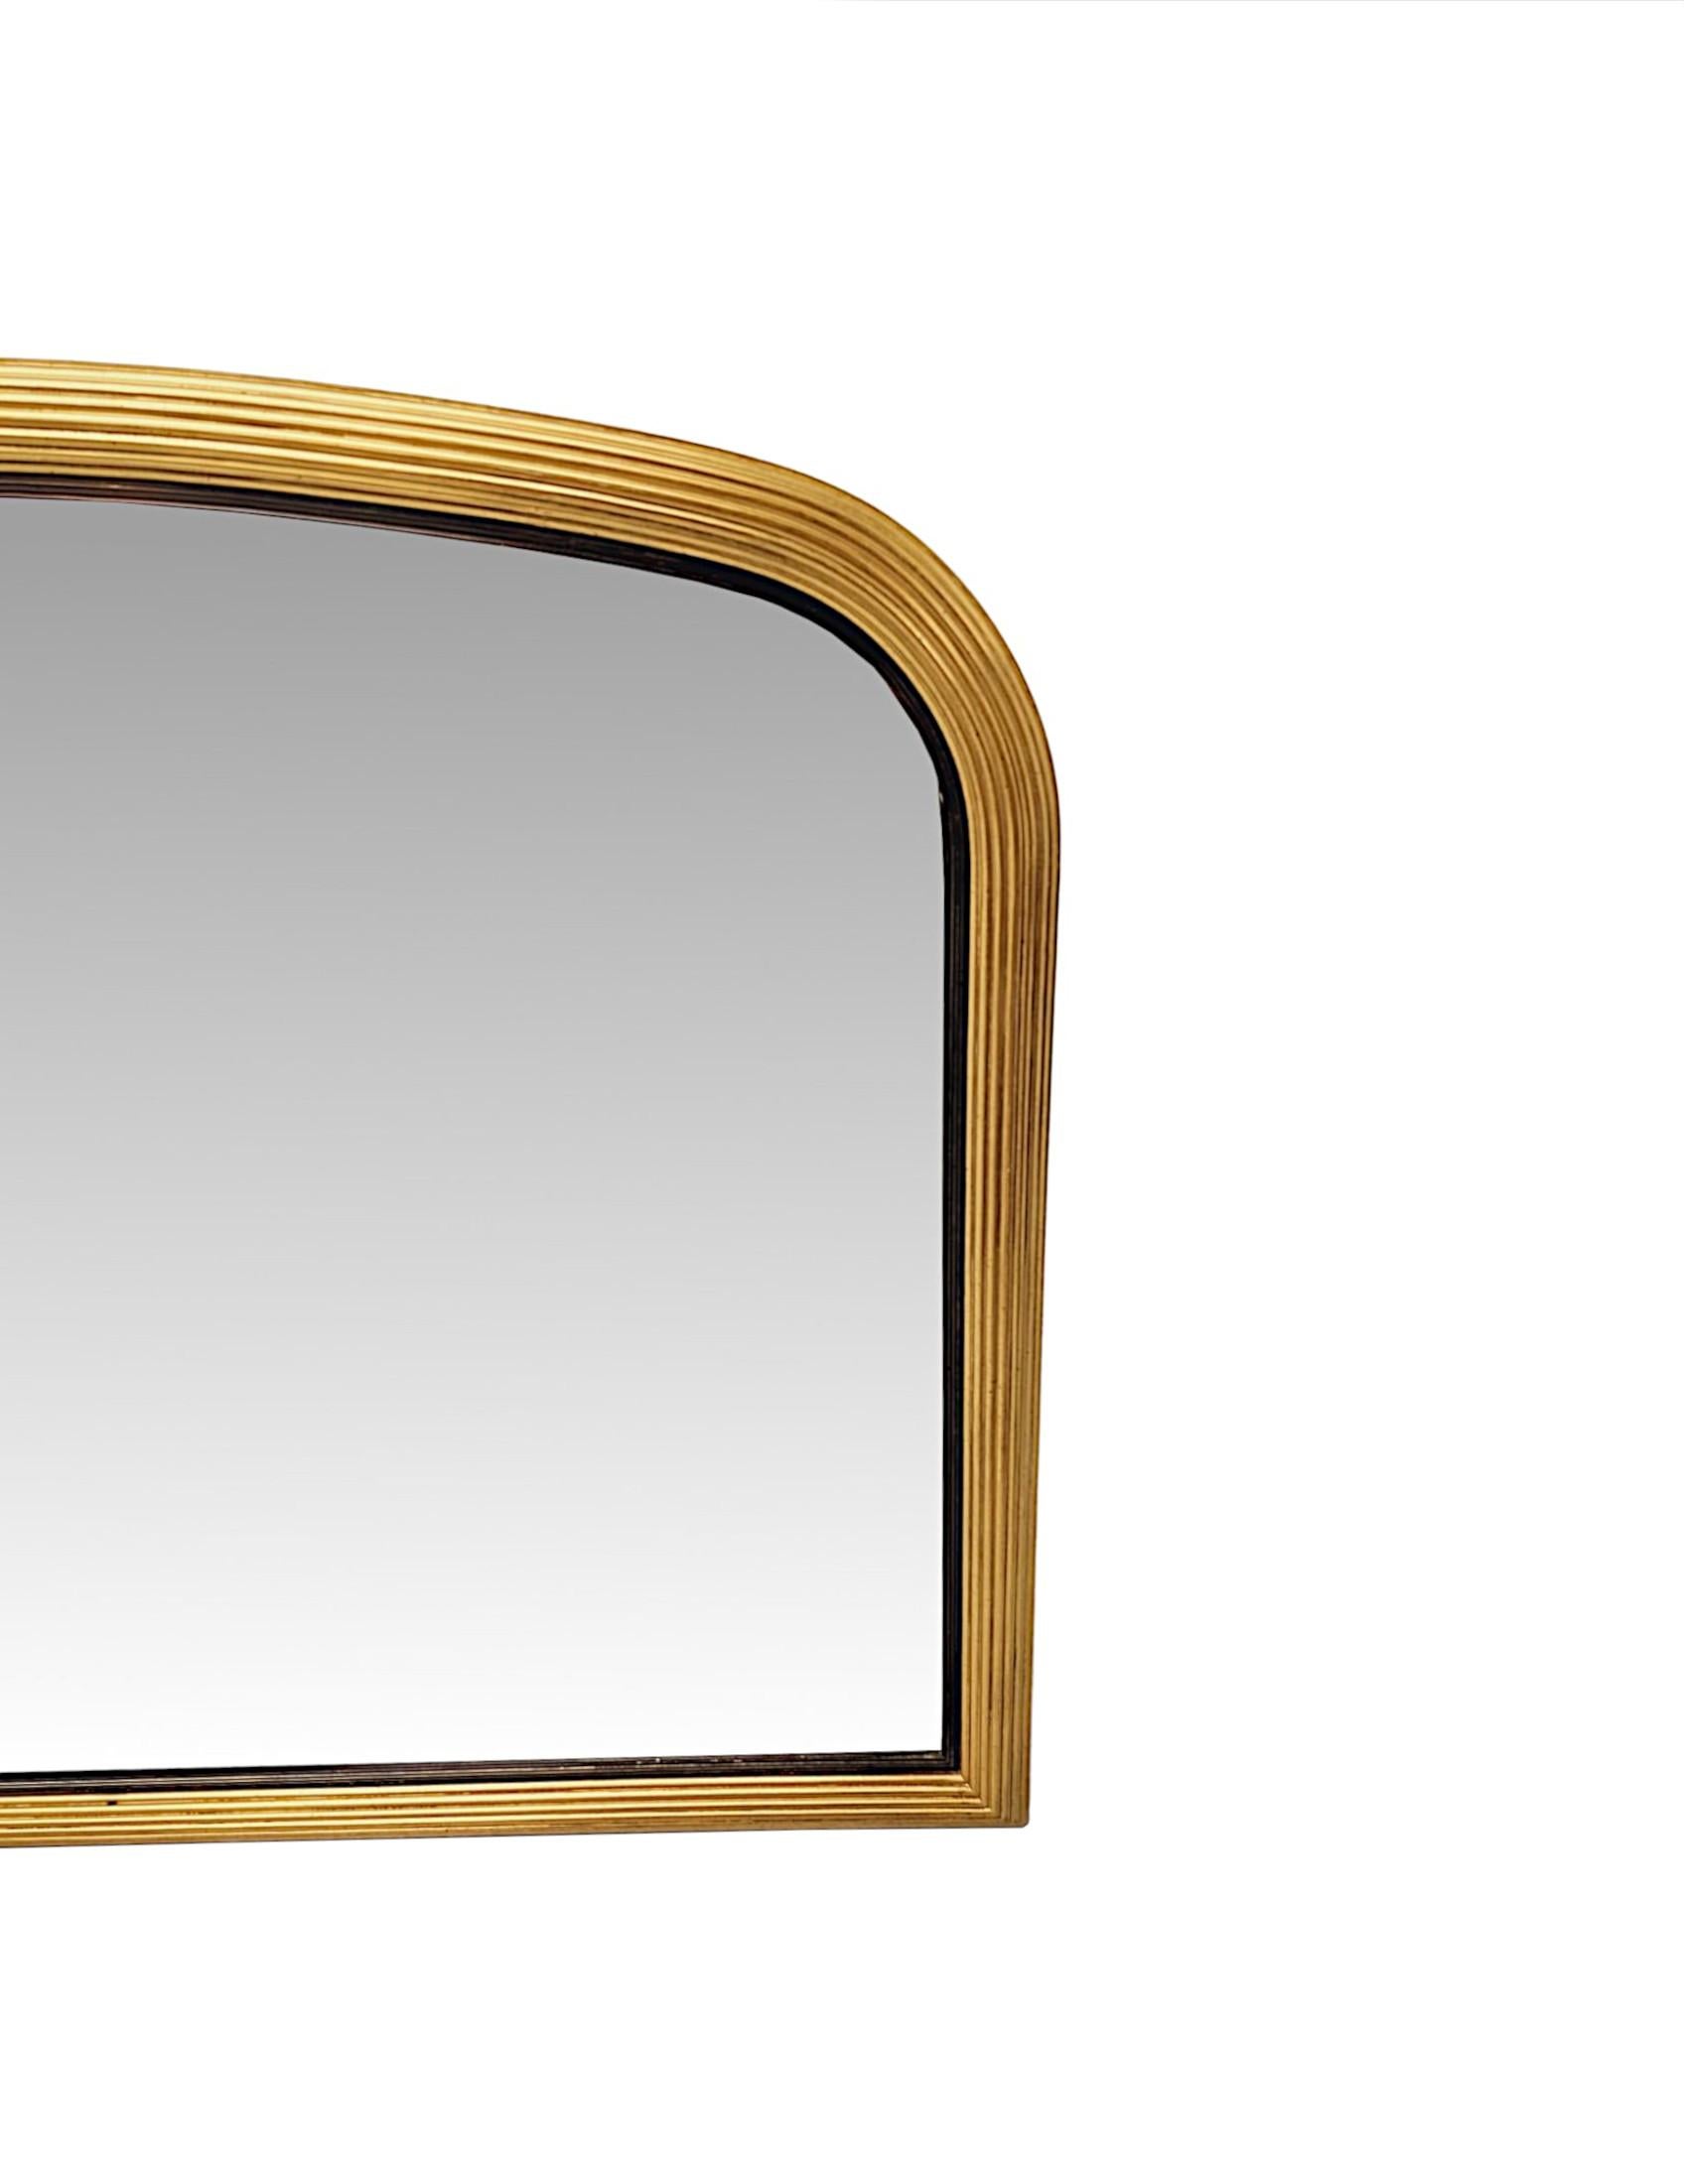 A very fine and unusual Edwardian elegantly simple, giltwood overmantel mirror of exceptional quality and low and wide proportions.  The bevelled and shaped mirror glass plate of archtop form is set within a stunningly carved, moulded and reeded